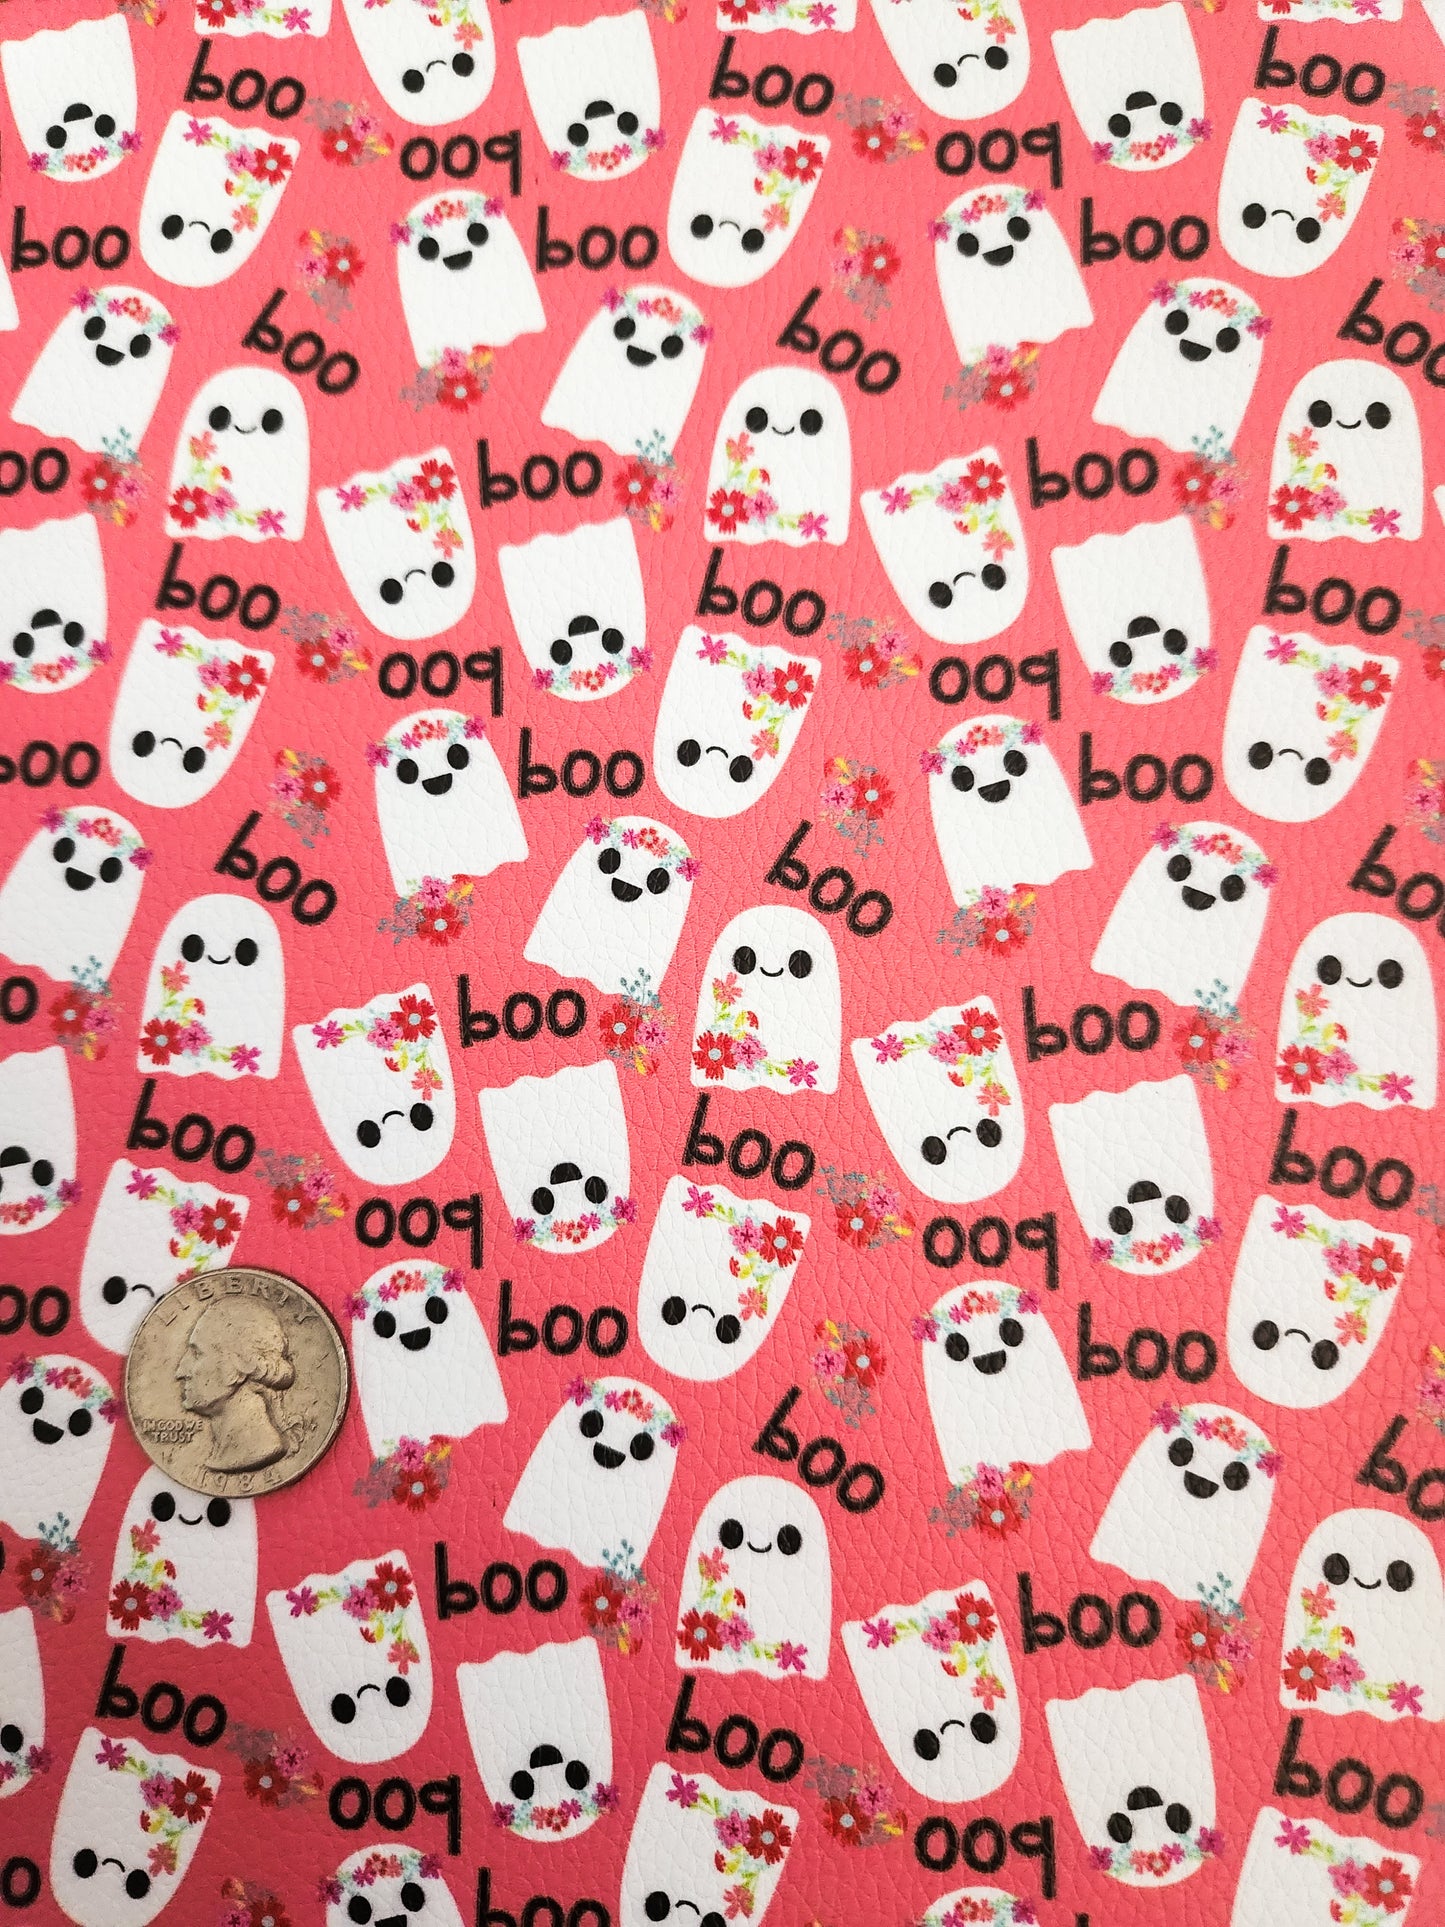 Boo Ghosts 9x12 faux leather sheet